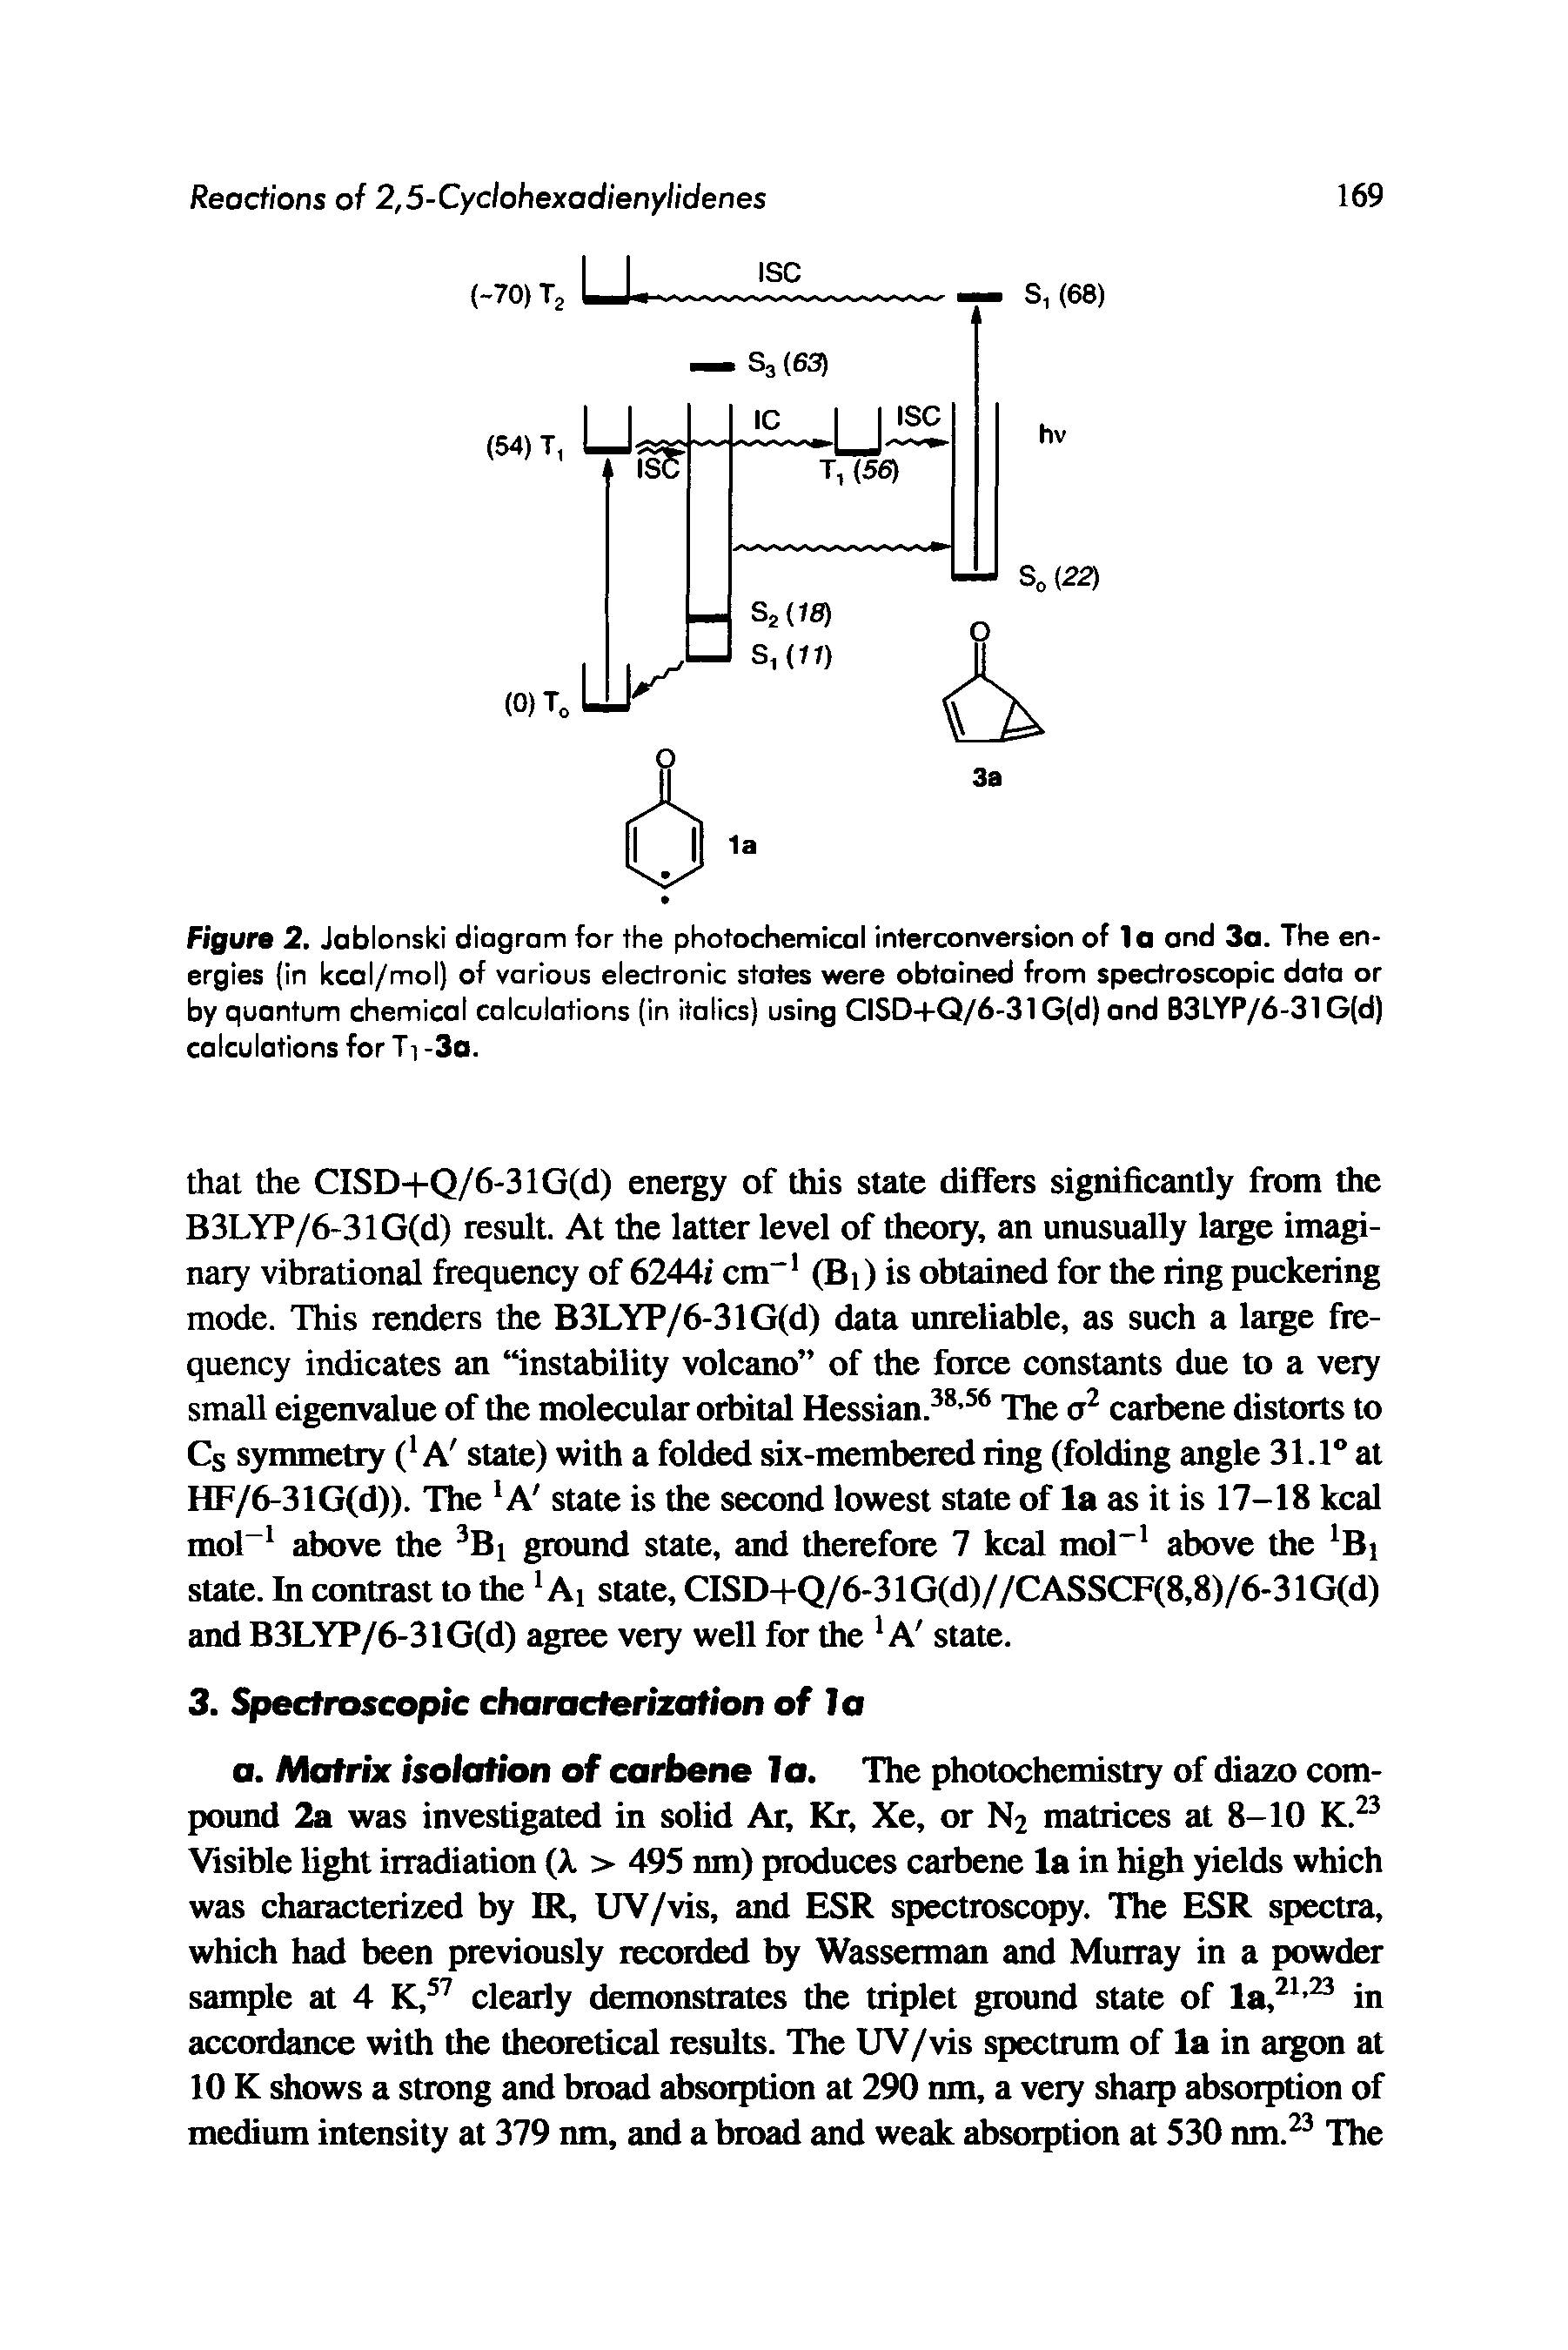 Figure 2. Jablonski diagram for the photochemical interconversion of la and 3a. The energies (in kcal/mol) of various electronic states were obtained from spectroscopic data or by quantum chemical calculations (in italics) using CISD+Q/6-31 G(d) and B3LYP/6-31 G(d) calculations for Ti -3a.